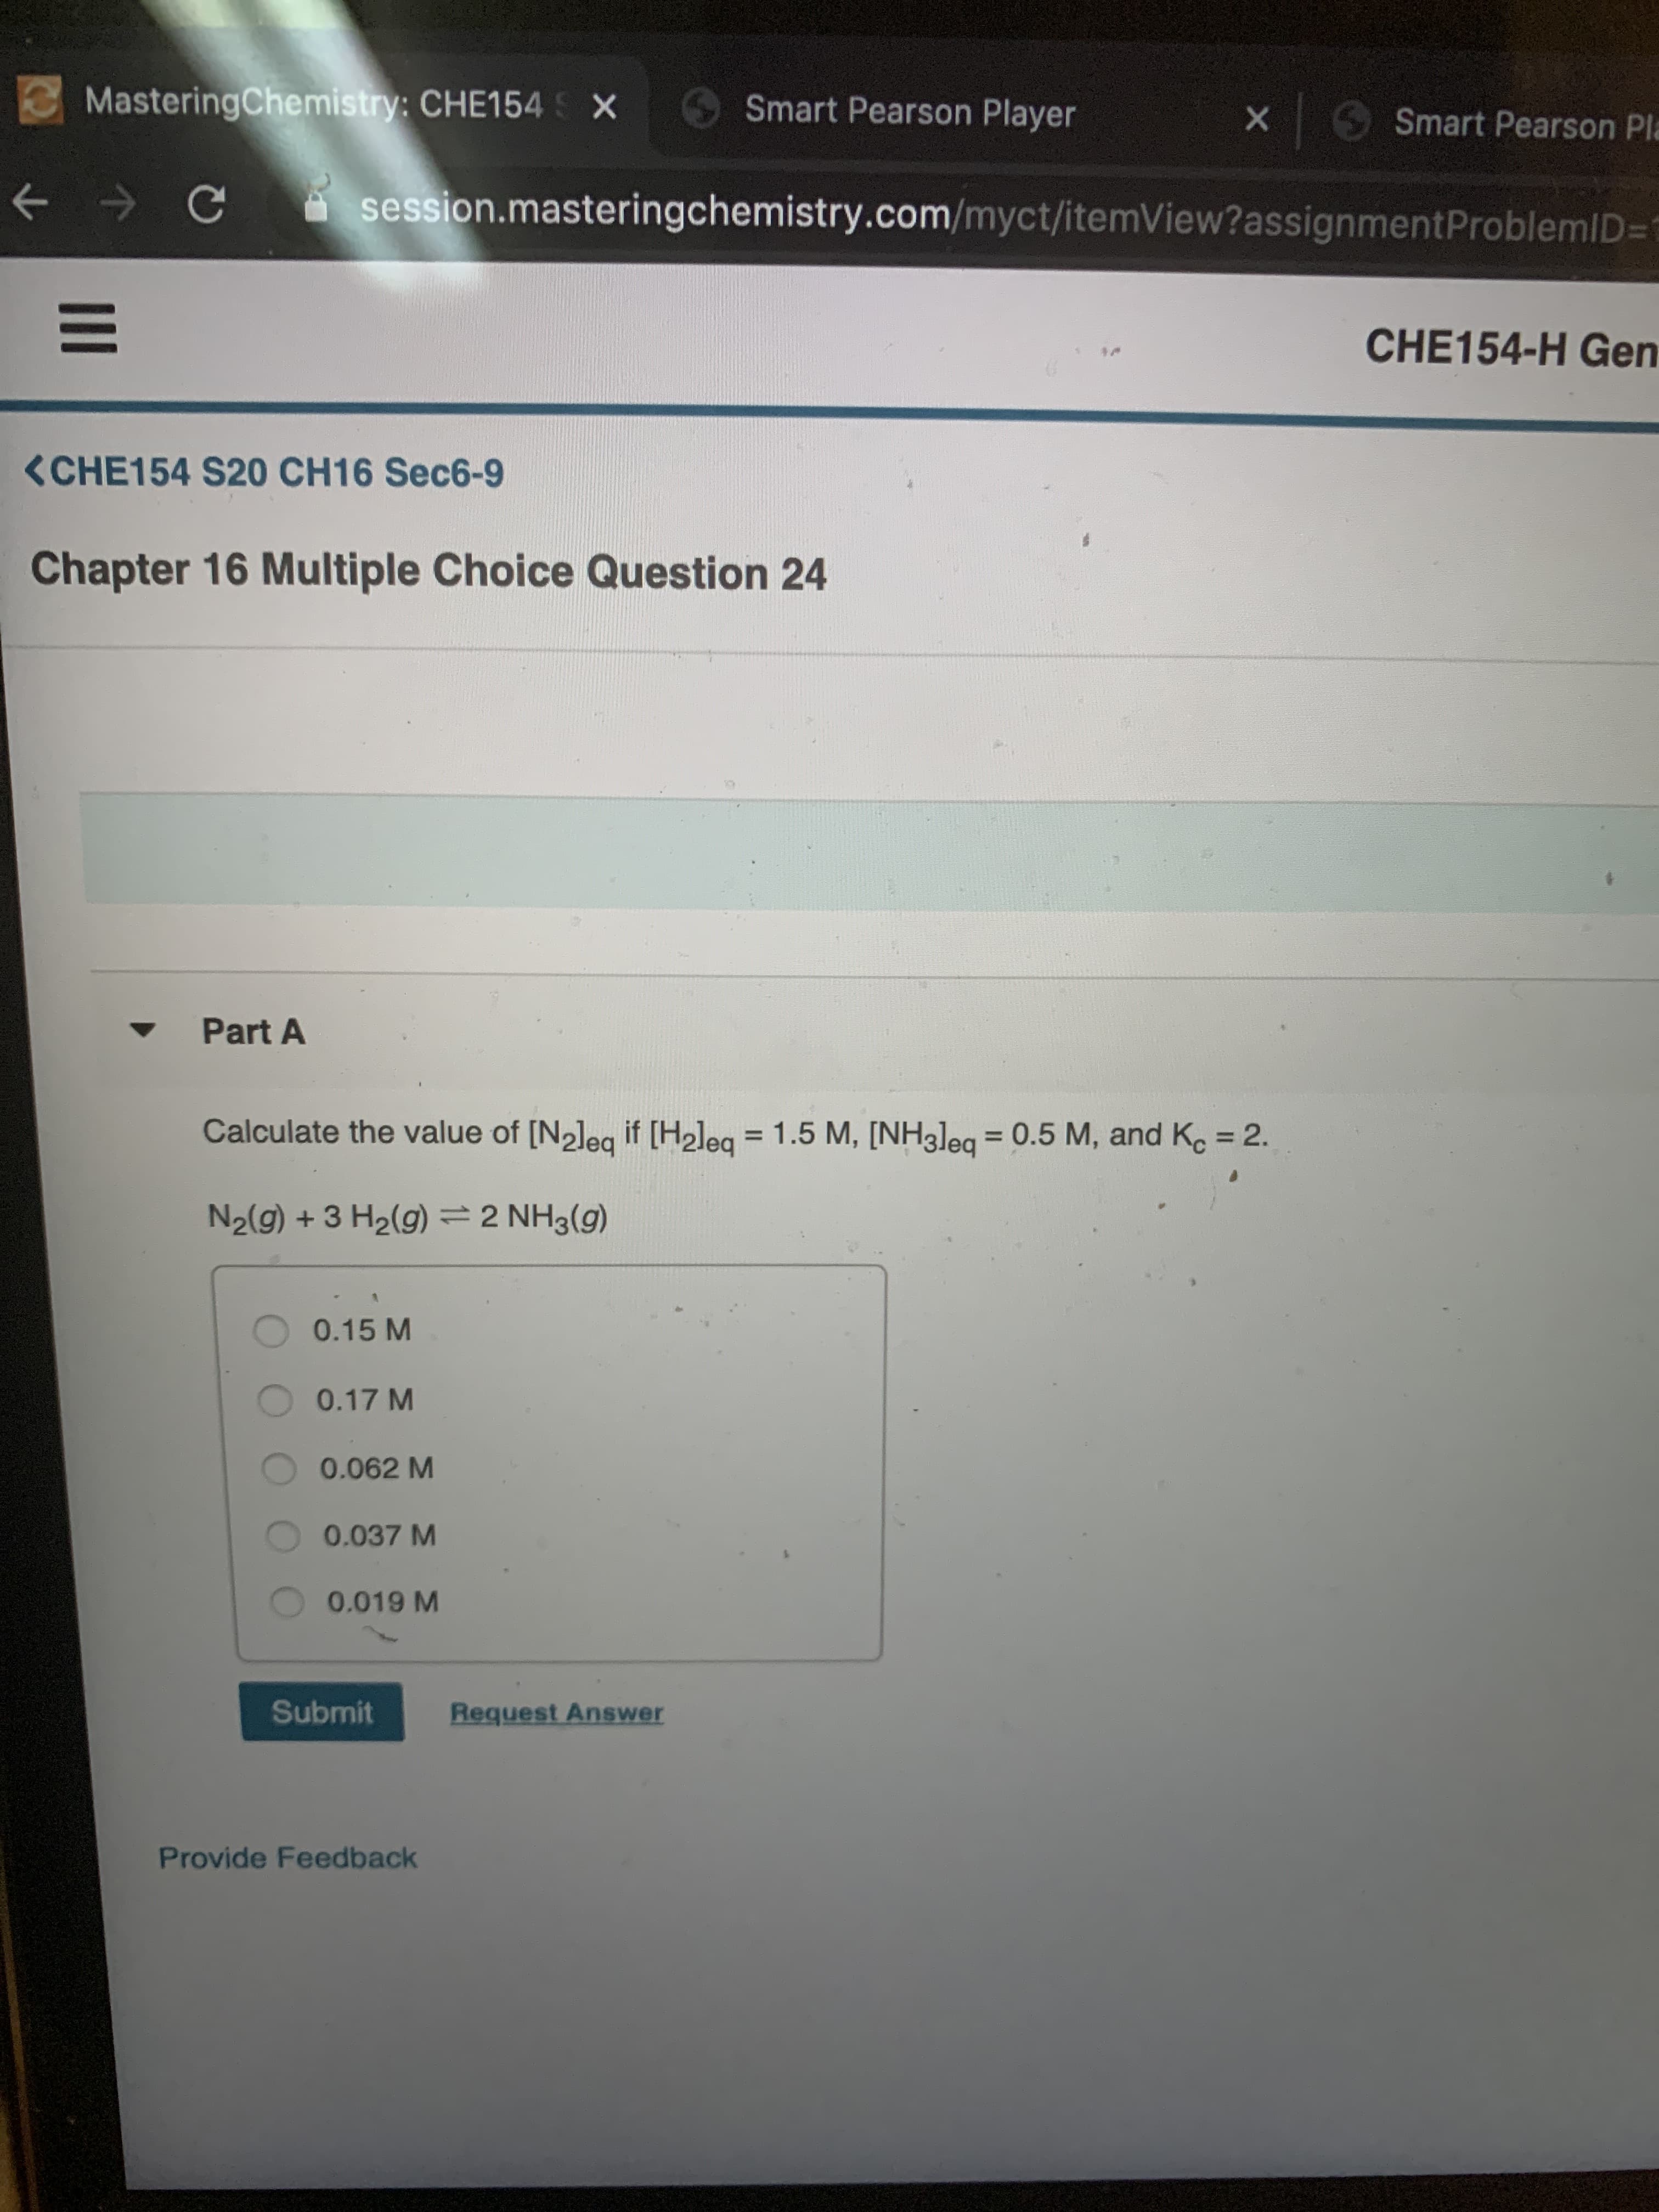 MasteringChemistry: CHE154 X
Smart Pearson Player
Smart Pearson Pla
session.masteringchemistry.com/myct/itemView?assignmentProblemID=D1
CHE154-H Gen
<CHE154 S20 CH16 Sec6-9
Chapter 16 Multiple Choice Question 24
Part A
Calculate the value of [N2leg if [Hleg = 1.5 M, [NH3]eq
0.5 M, and K. = 2.
%3D
=
%3D
N2(g) + 3 H2(g) =2 NH3(g)
0.15 M
0.17 M
0.062 M
0.037 M
0.019 M
Submit
Request Answer
Provide Feedback
